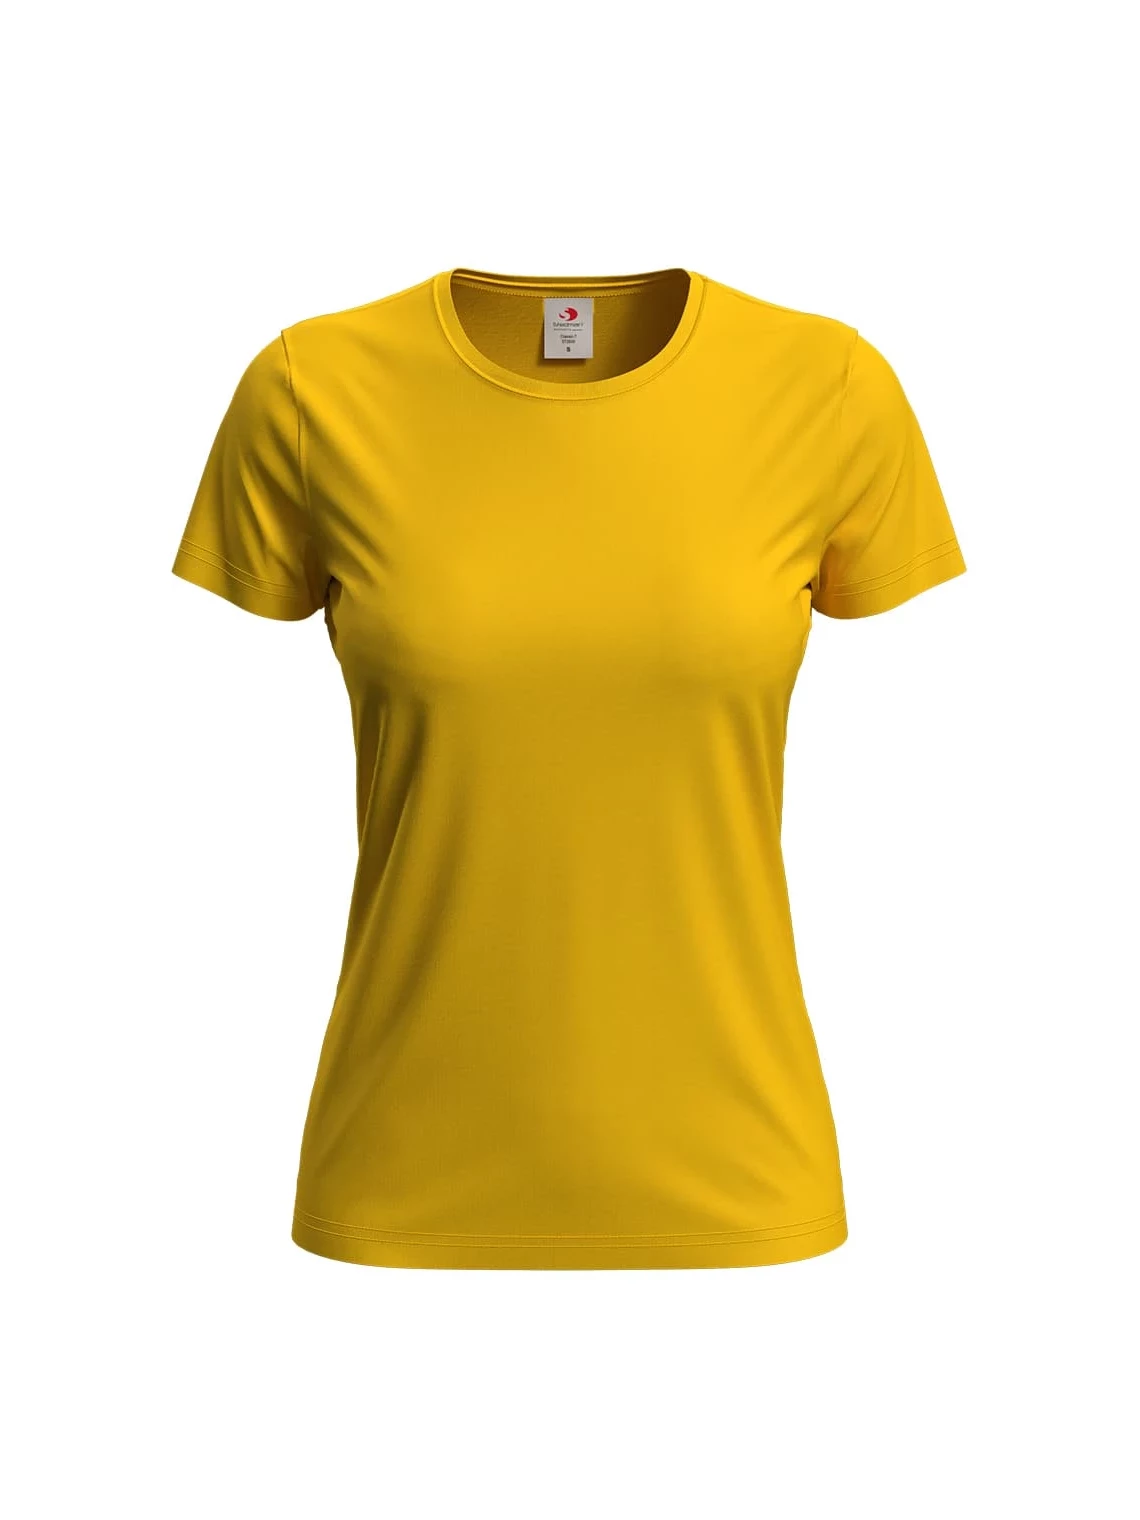 Women’s T-shirt printed Classic-T Fitted Stedman